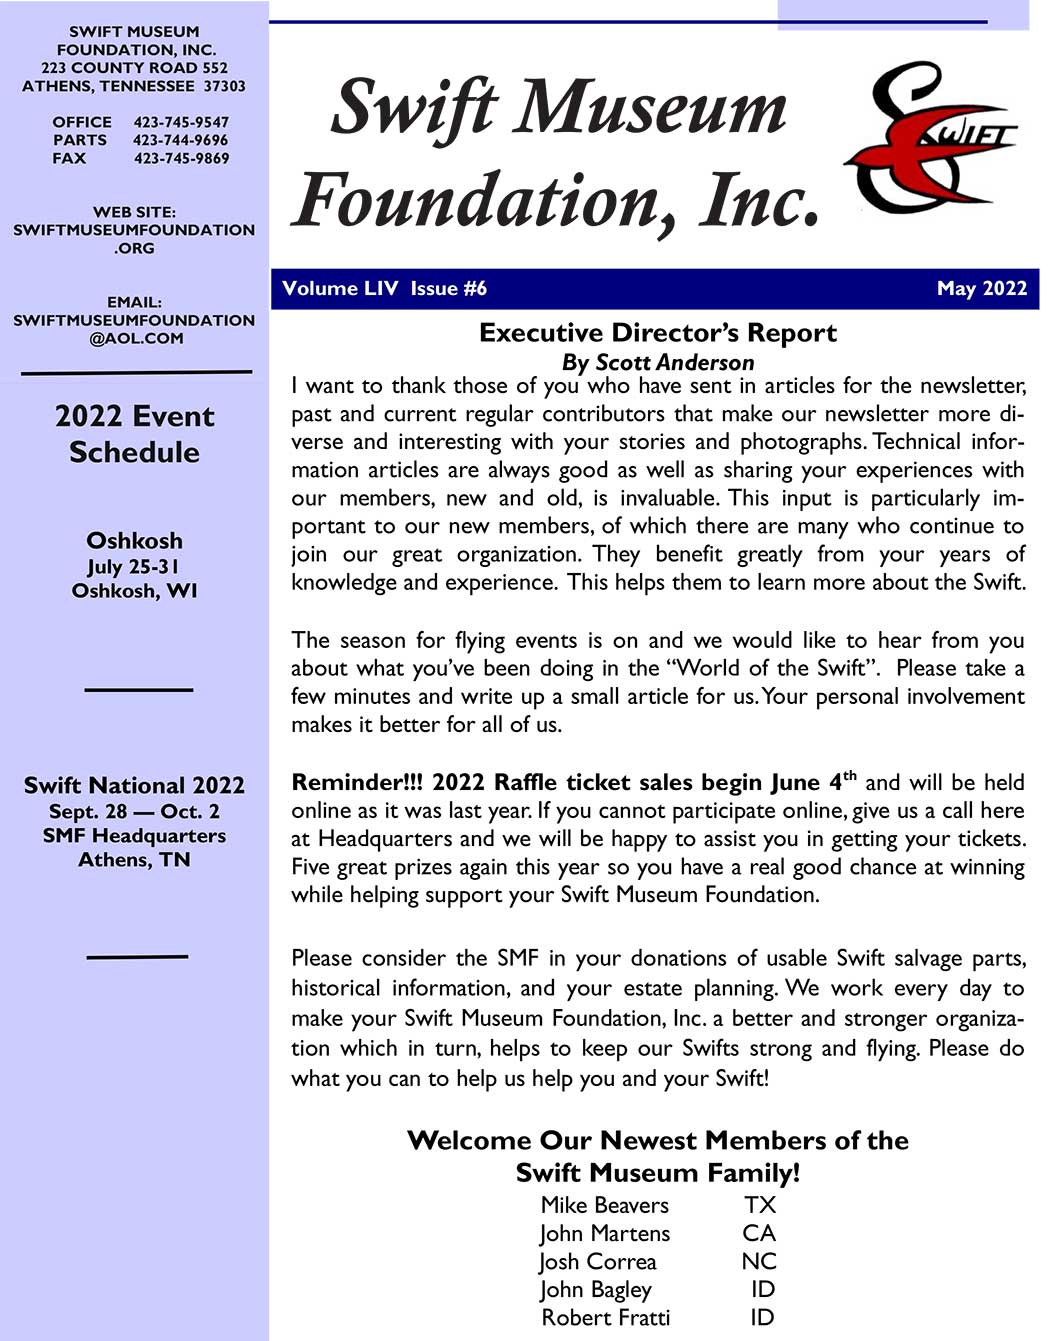 May 2022 SMF Newsletter